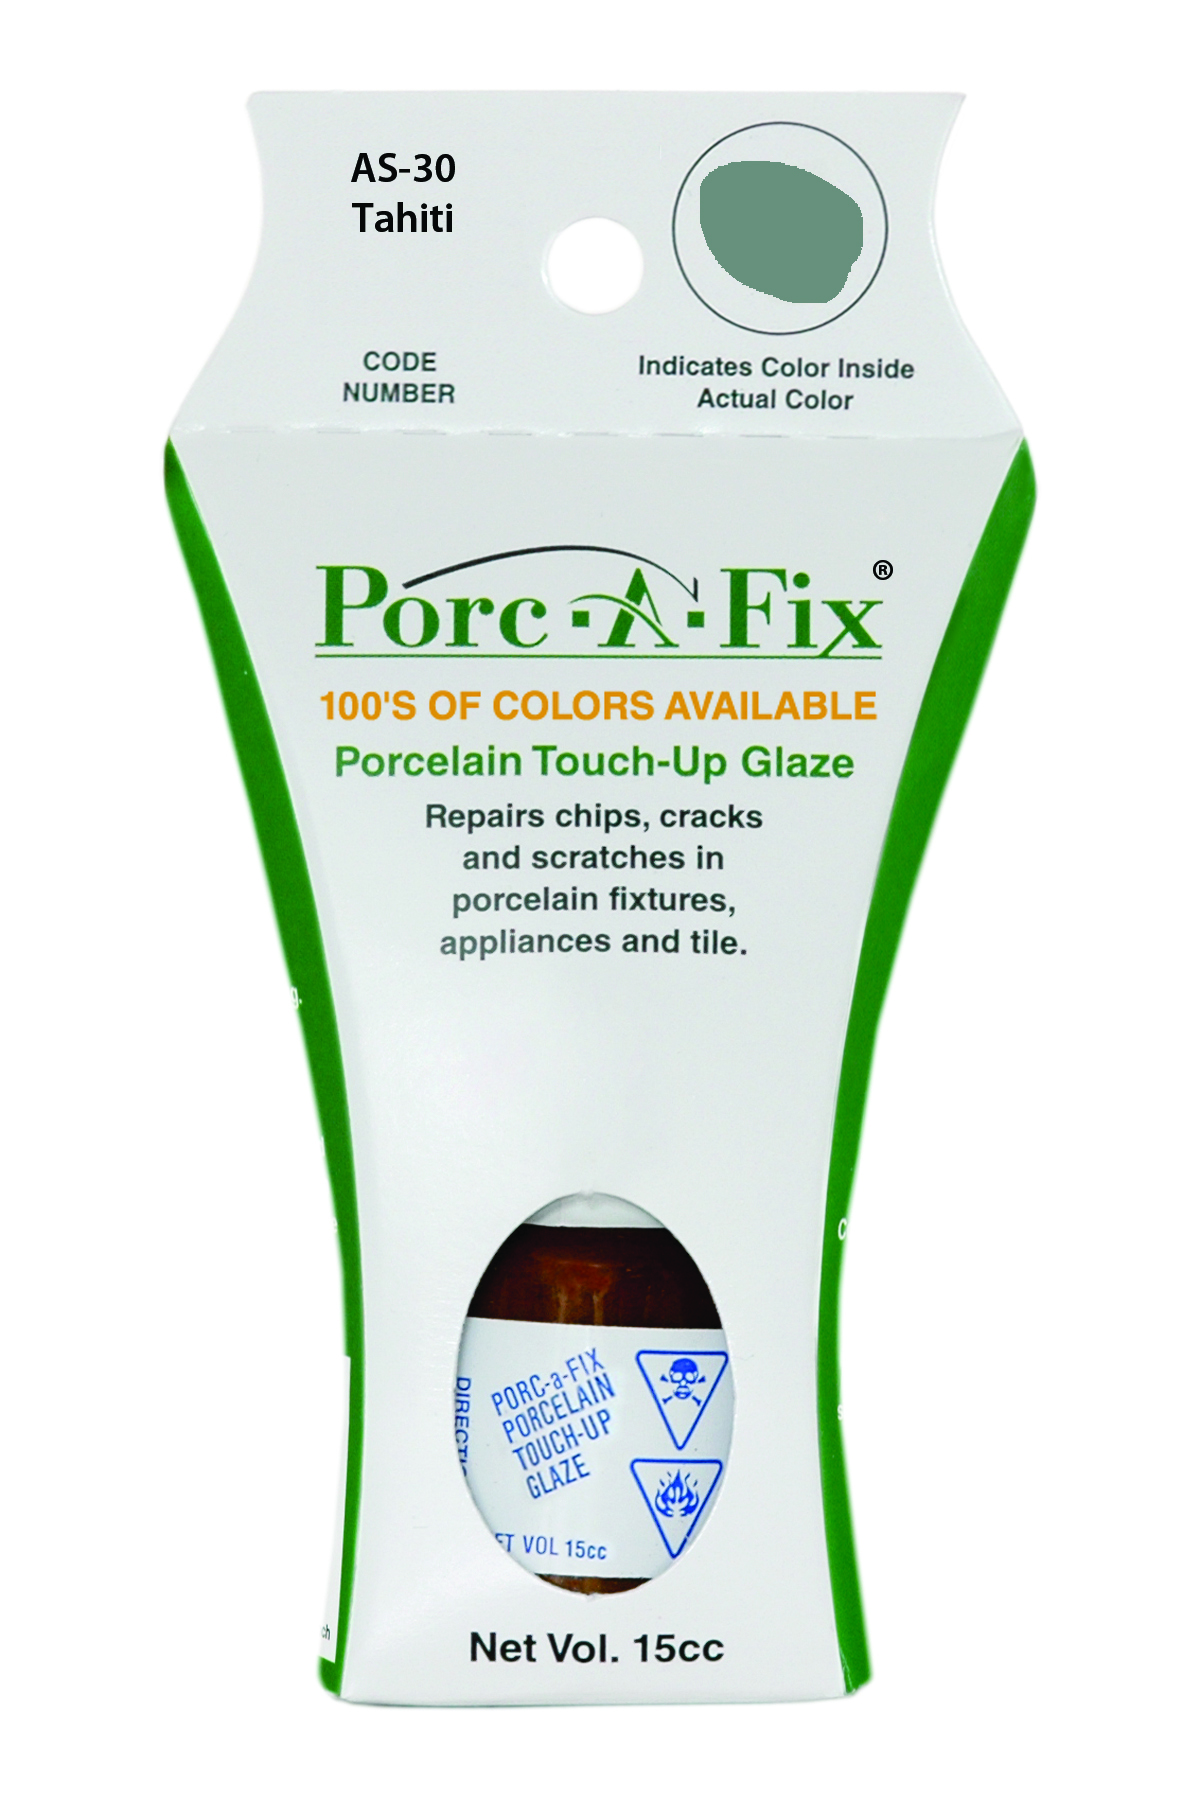 Fixture-Fix | AS-30 | Porc-A-Fix Touch-Up Glaze American Standard Tahiti - Compatible with American Standard 070900-1640A Touch Up Paint Kit - TAHITI